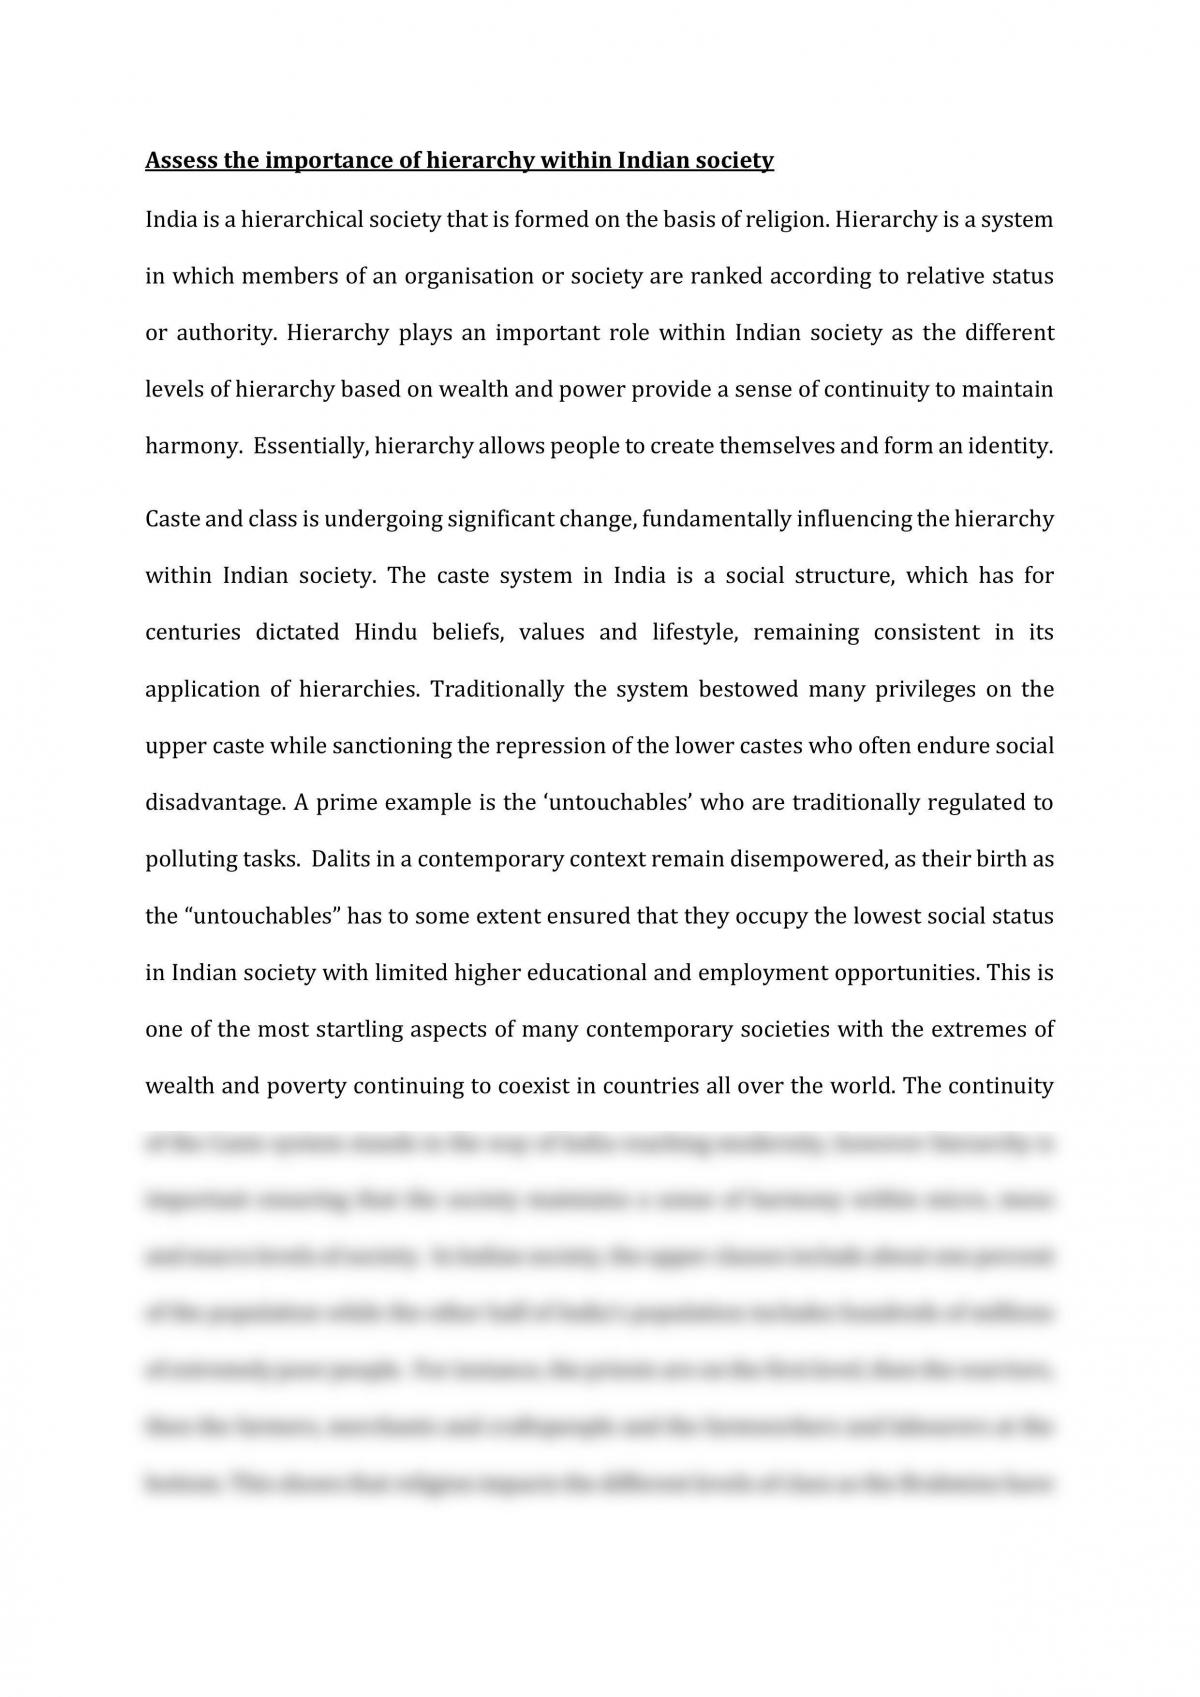 clean india essay in english 150 words